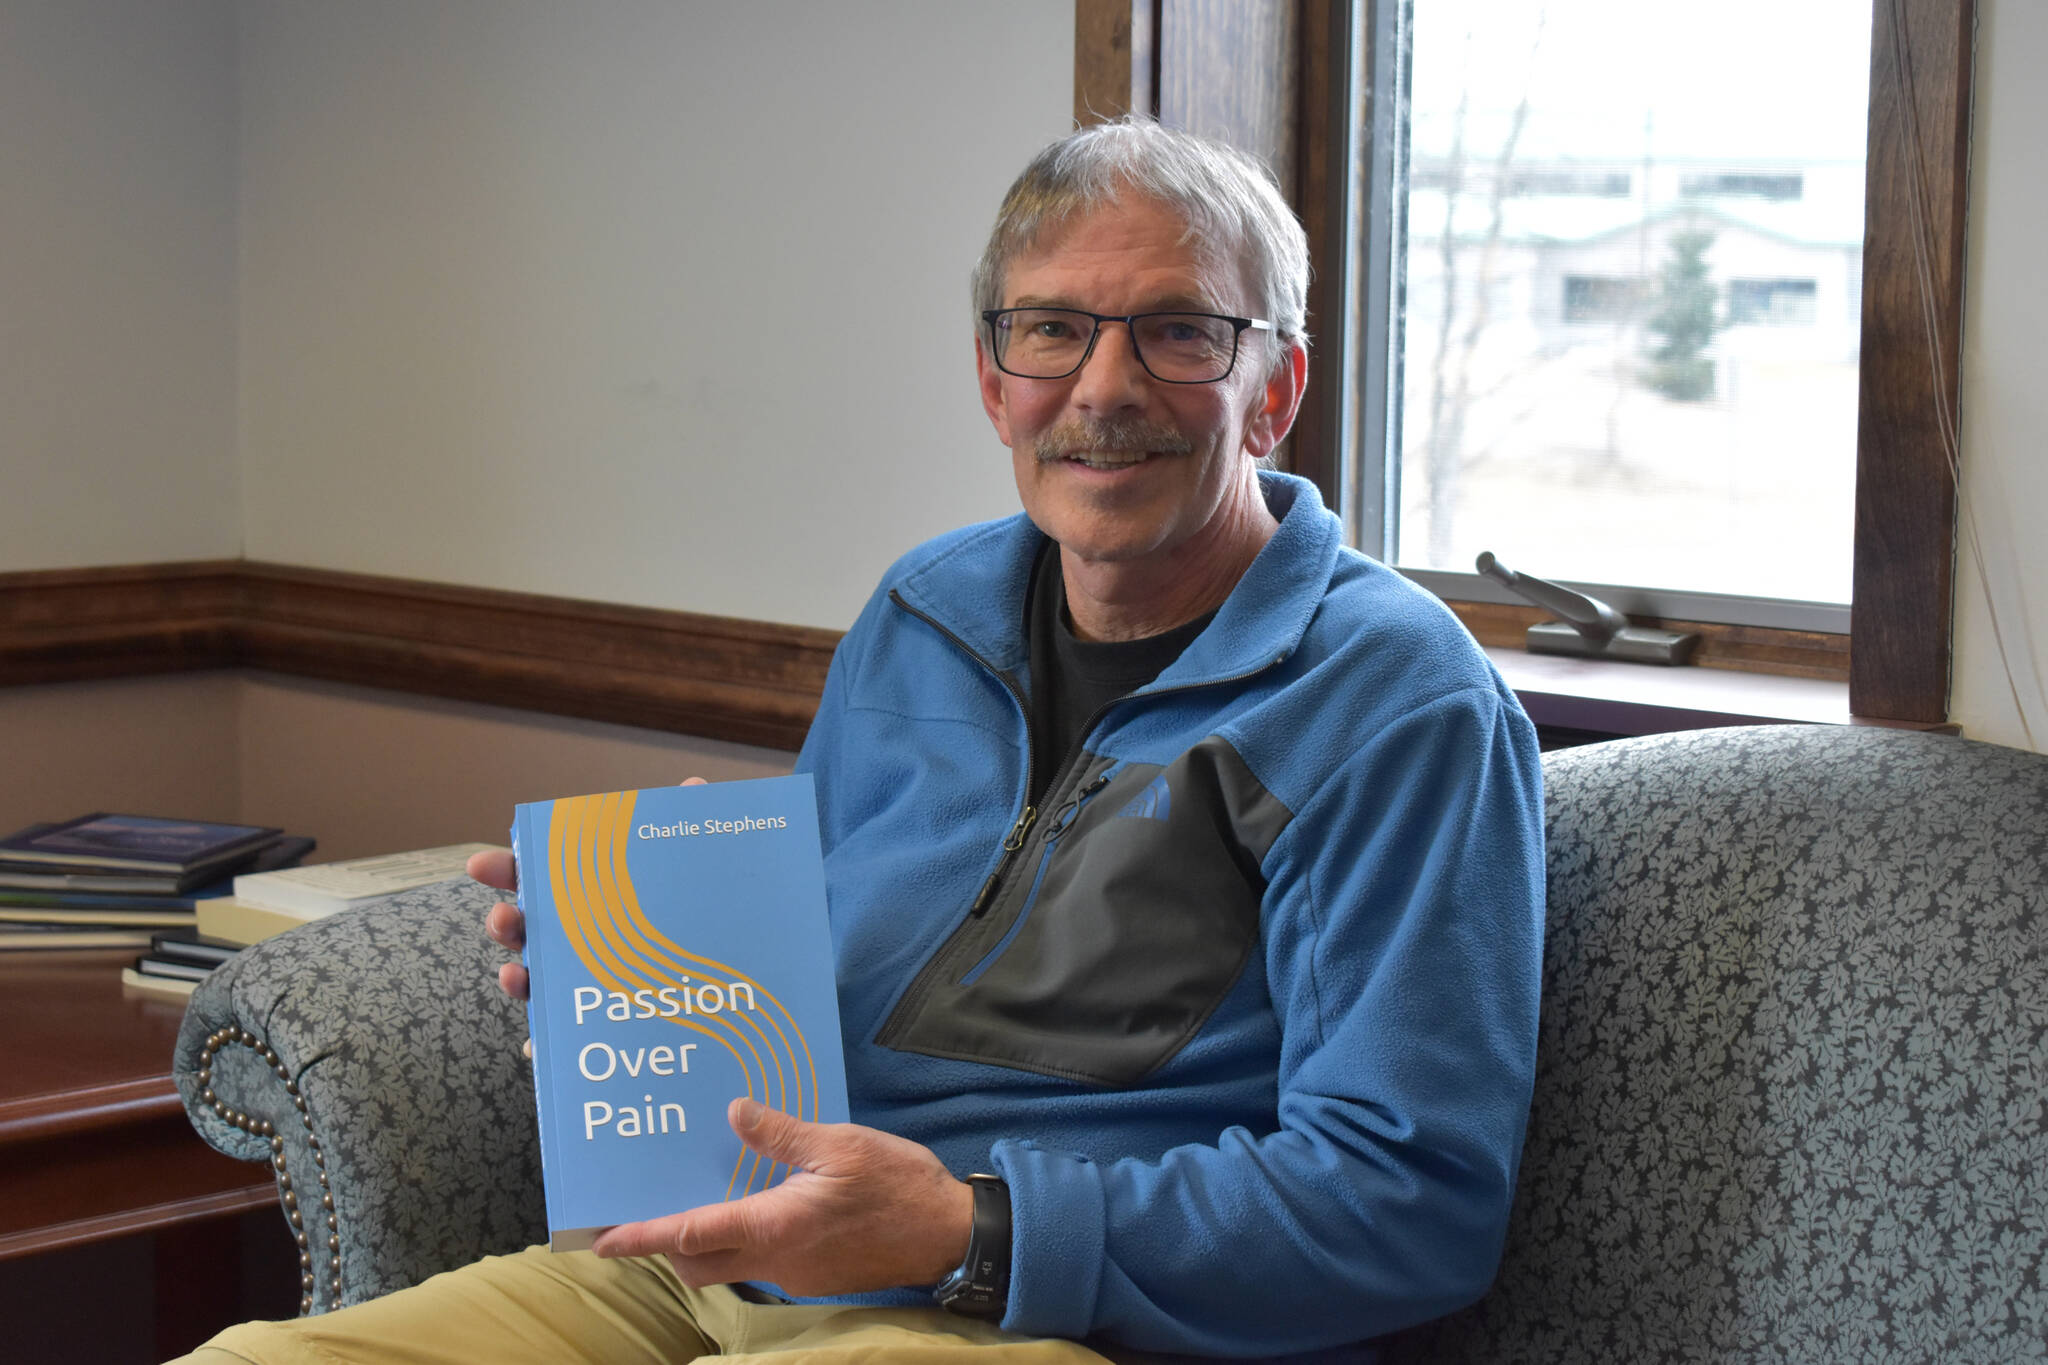 Charlie Stephens sits with a copy of his book, "Passion Over Pain" on Monday, May 1, 2023, in the Peninsula Clarion offices in Kenai, Alaska. (Jake Dye/Peninsula Clarion)